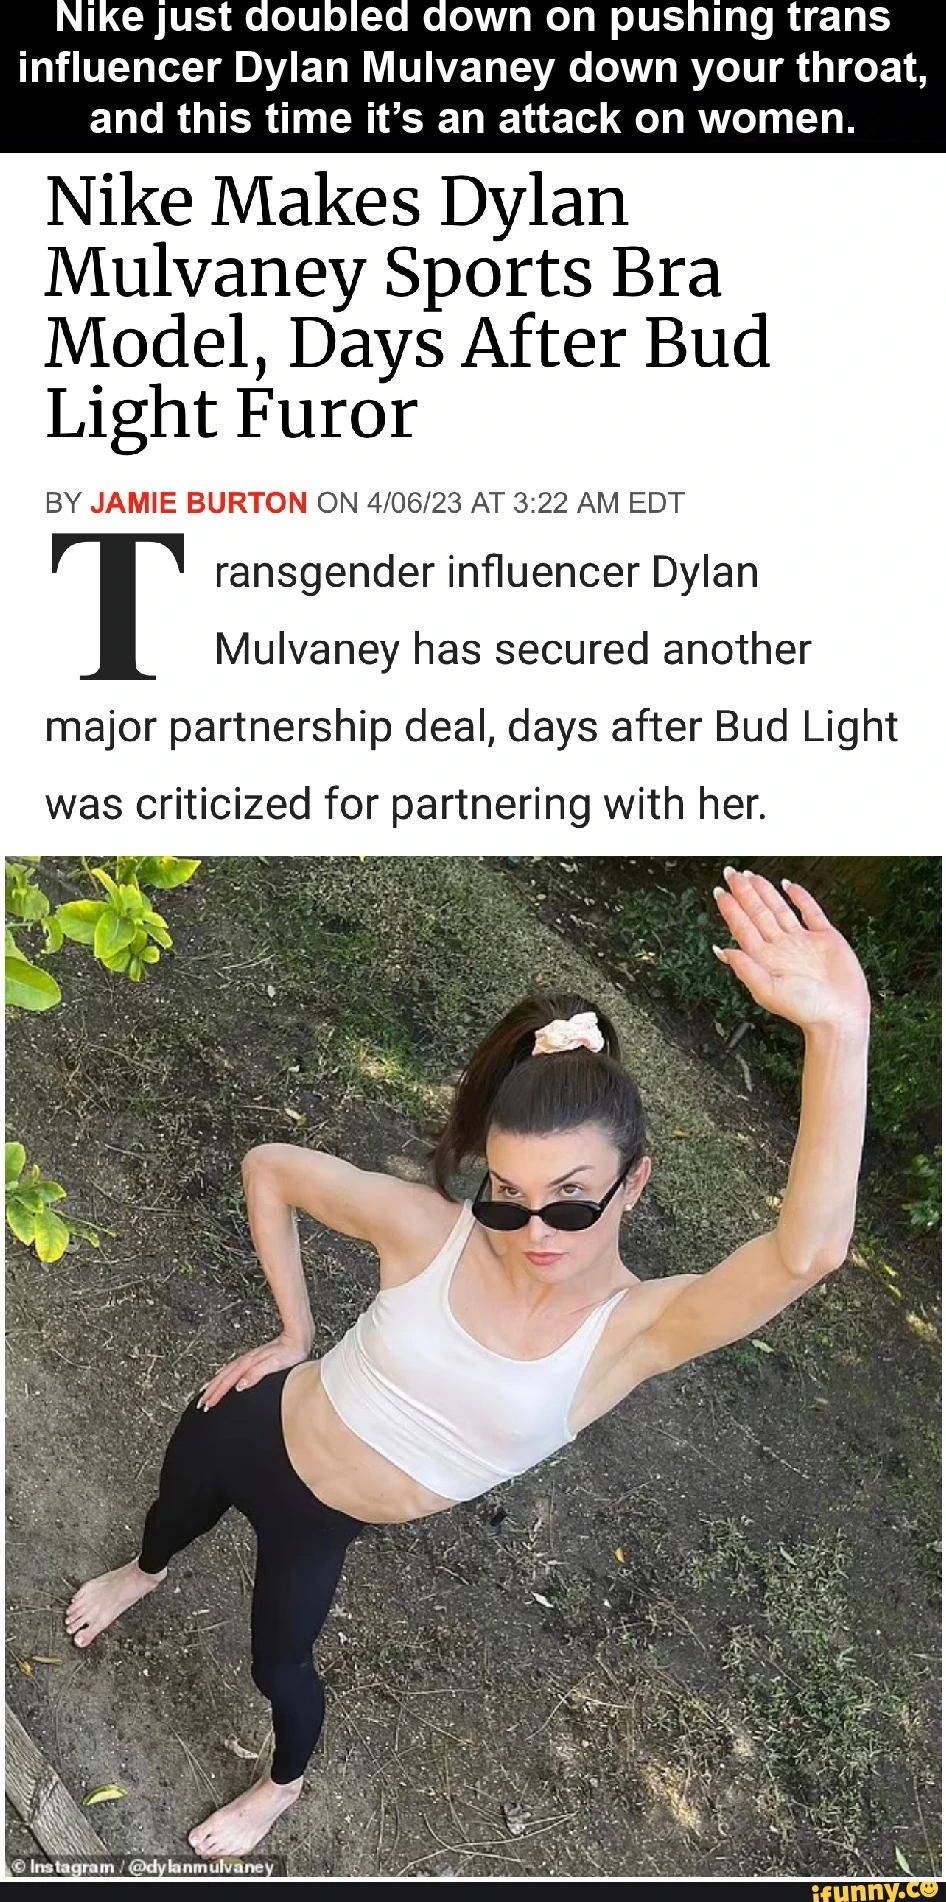 Nike just doubled down on pushing trans influencer Dylan Mulvaney down your throat, and this time it's an attack on women. Nike Makes Dylan Mulvaney Sports Bra Model, Days After Bud Light Furor BY JAMIE BURTON ON AT AM EDT T ransgender influencer Dylan Mulvaney has secured another major partnership deal, days after Bud Light was Criticized for partnering with her.